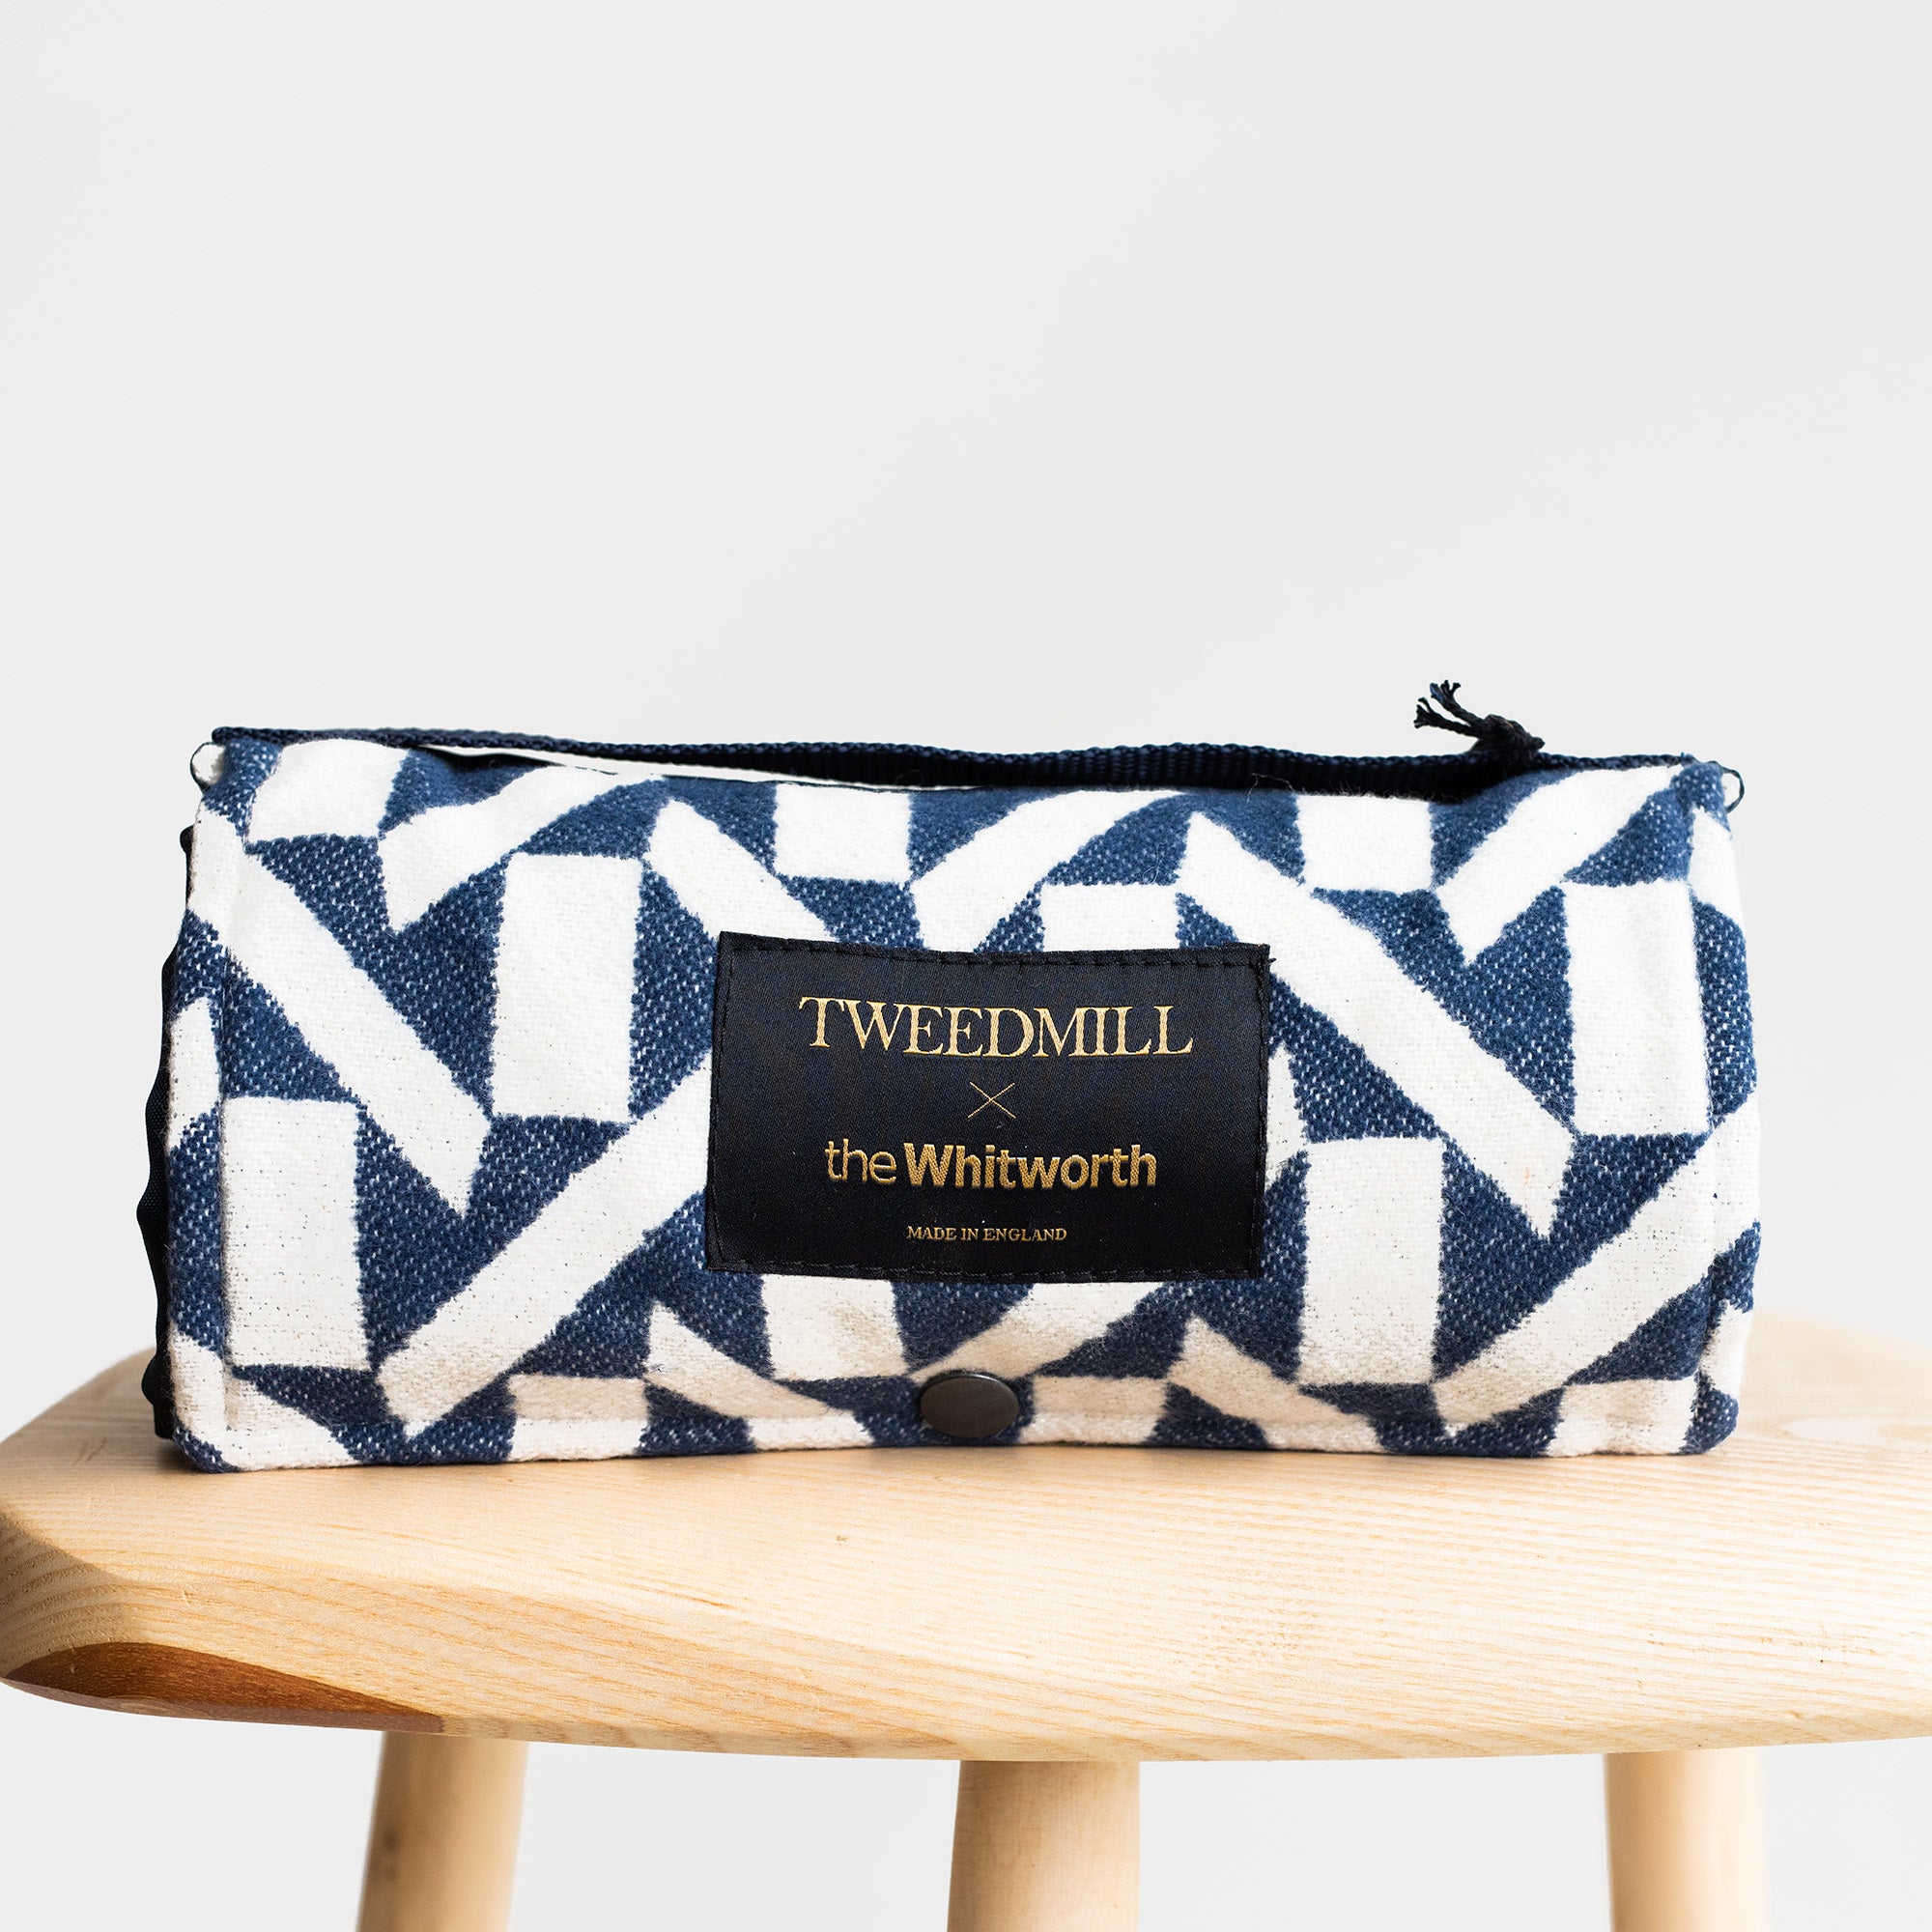 Tweedmill picnic rug rolled up and photographed on a stool. The rug has a navy and white abstract pattern design with the Tweedmill x Whitworth branding at the centre